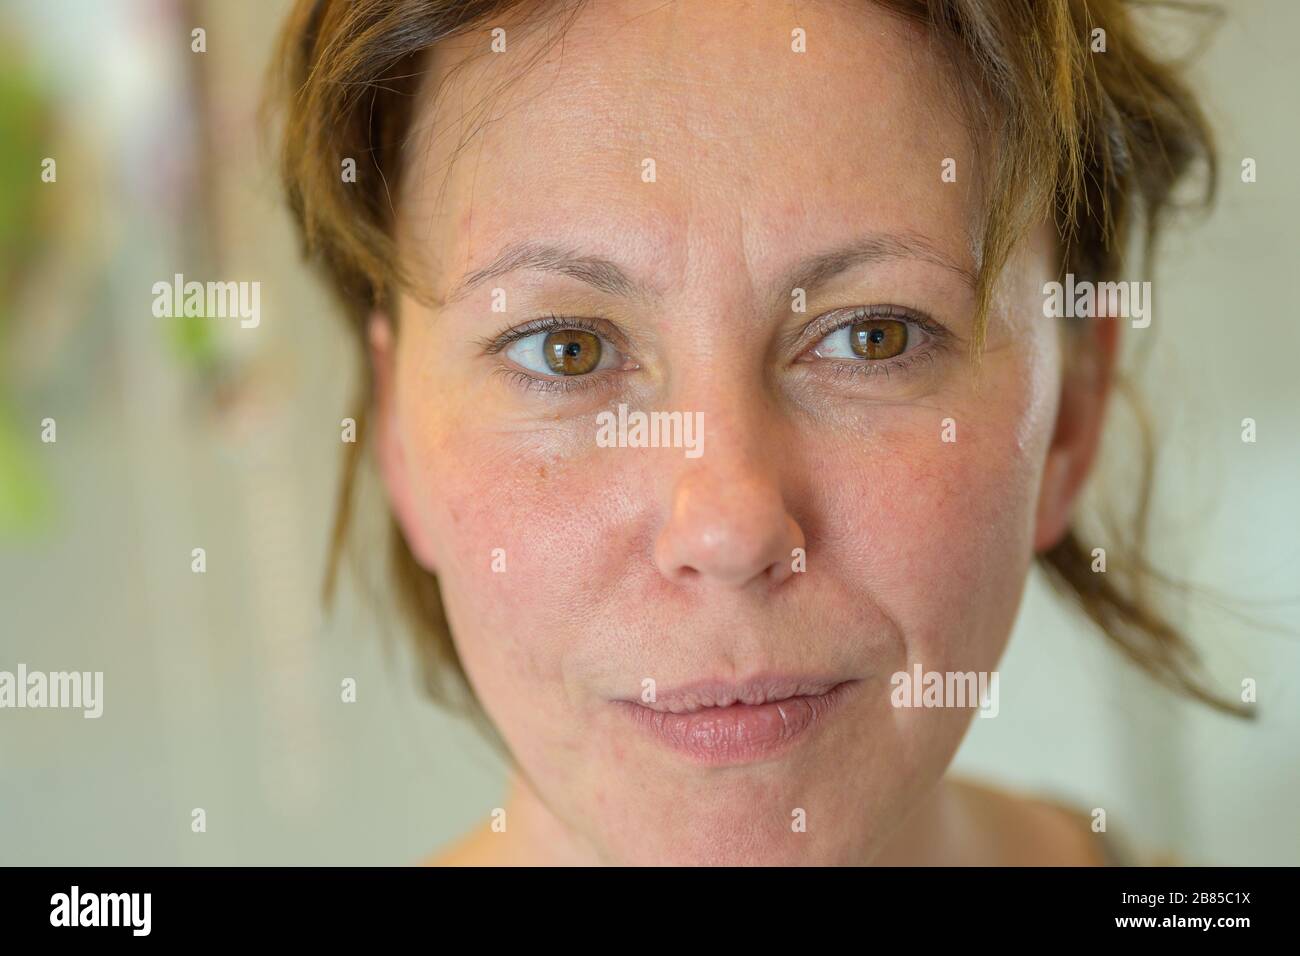 Serious woman with a quiet pensive smile glancing to the side in a close up cropped facial portrait indoors Stock Photo